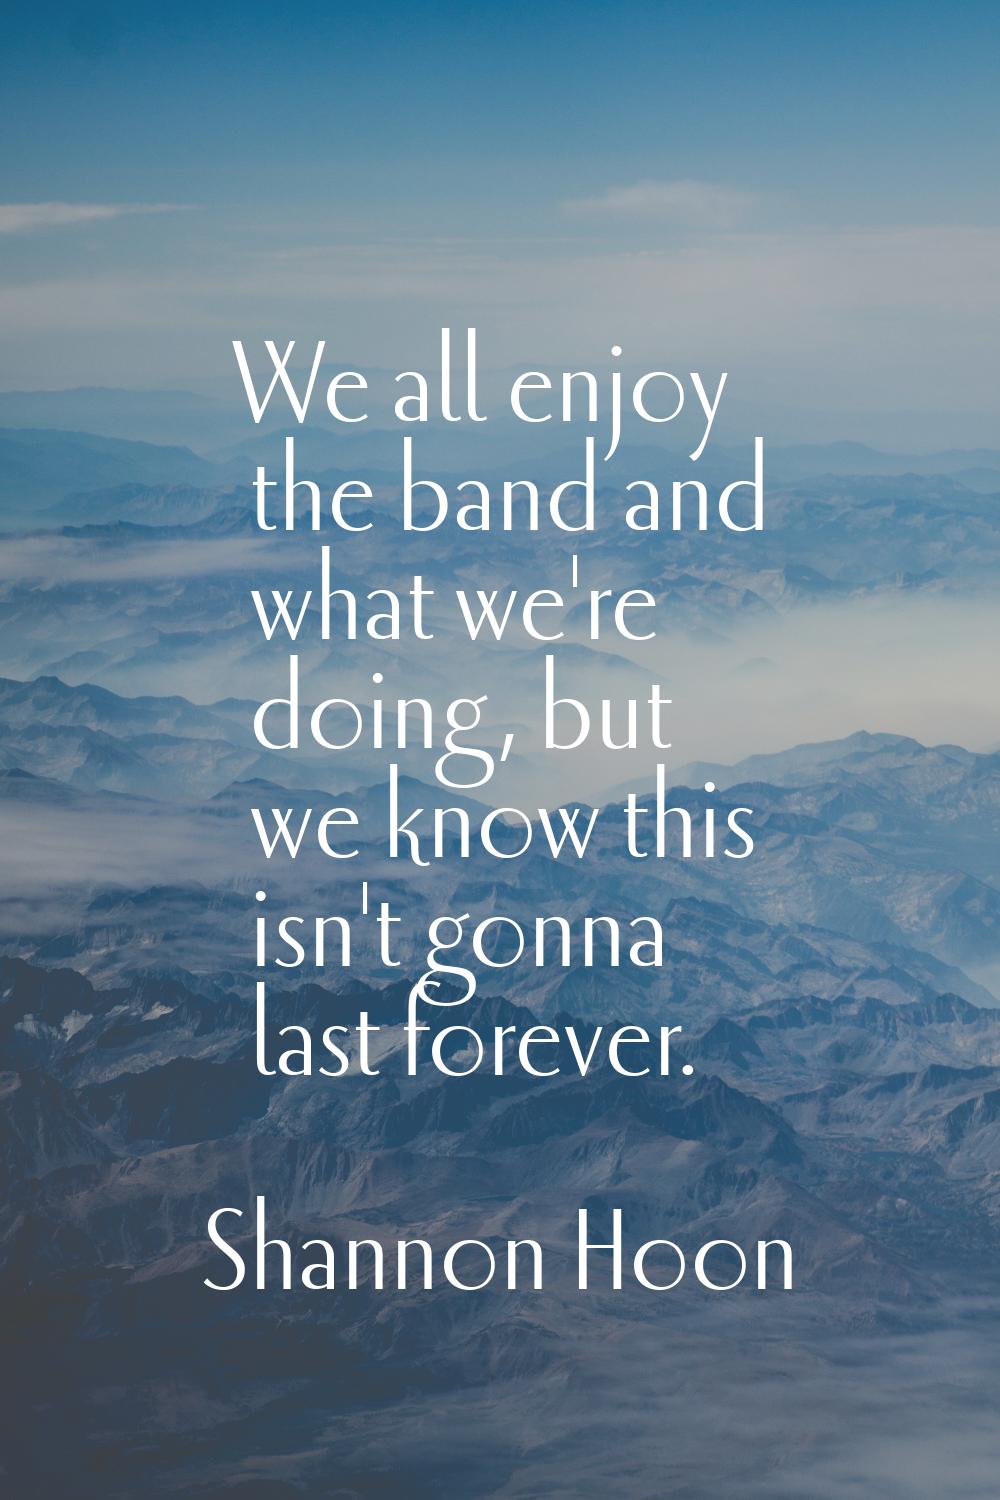 We all enjoy the band and what we're doing, but we know this isn't gonna last forever.